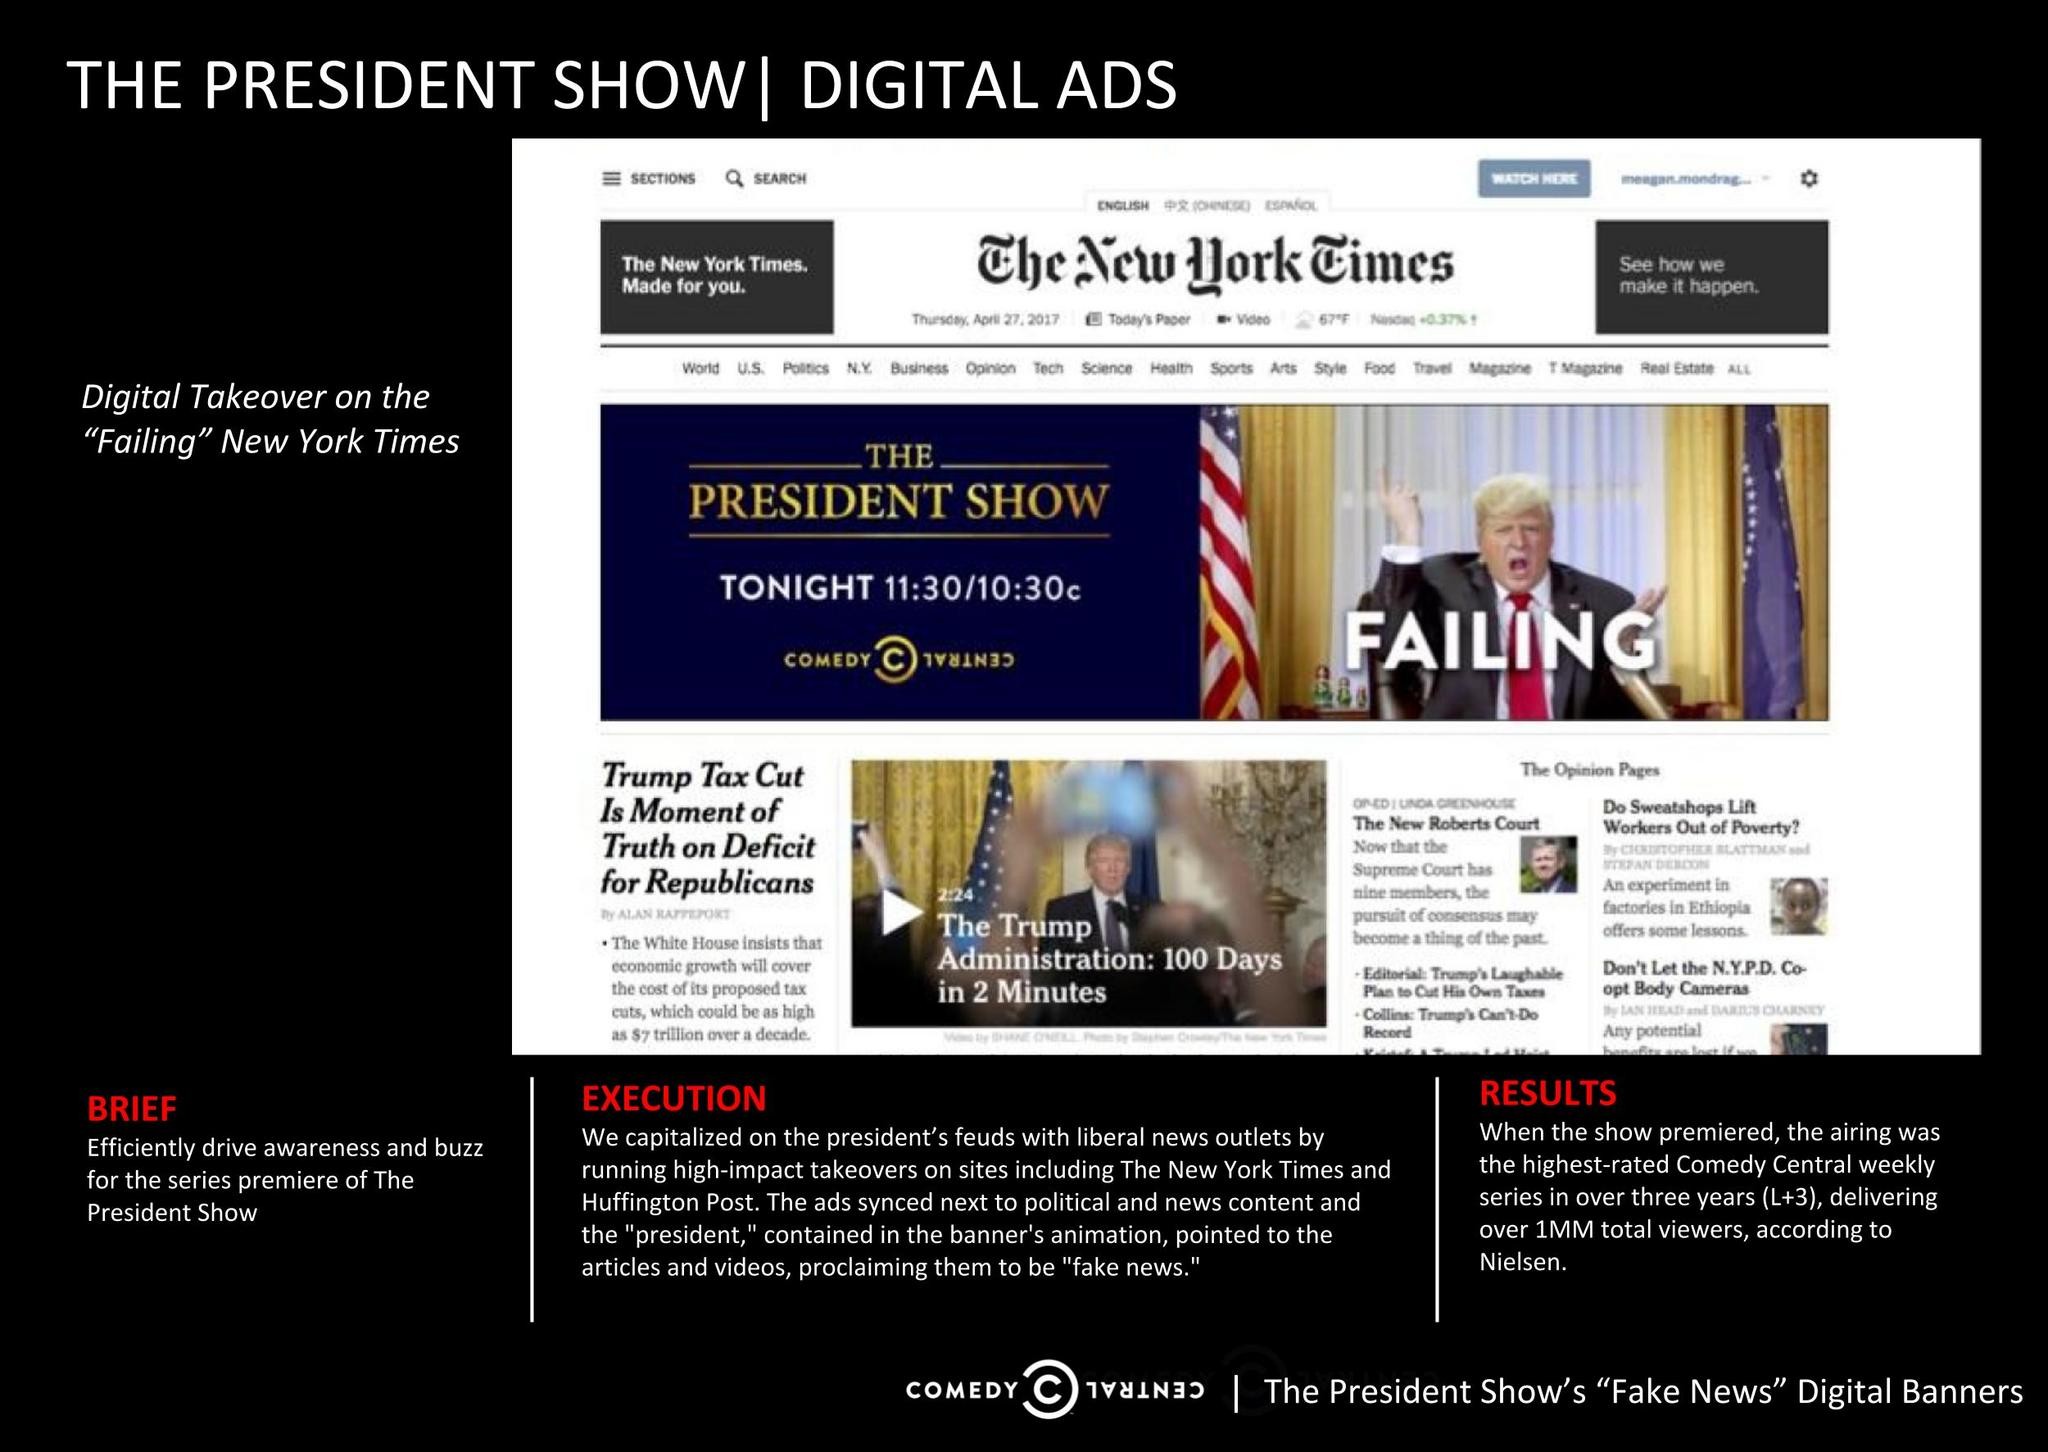 The President Show's "Fake News" Digital Banners